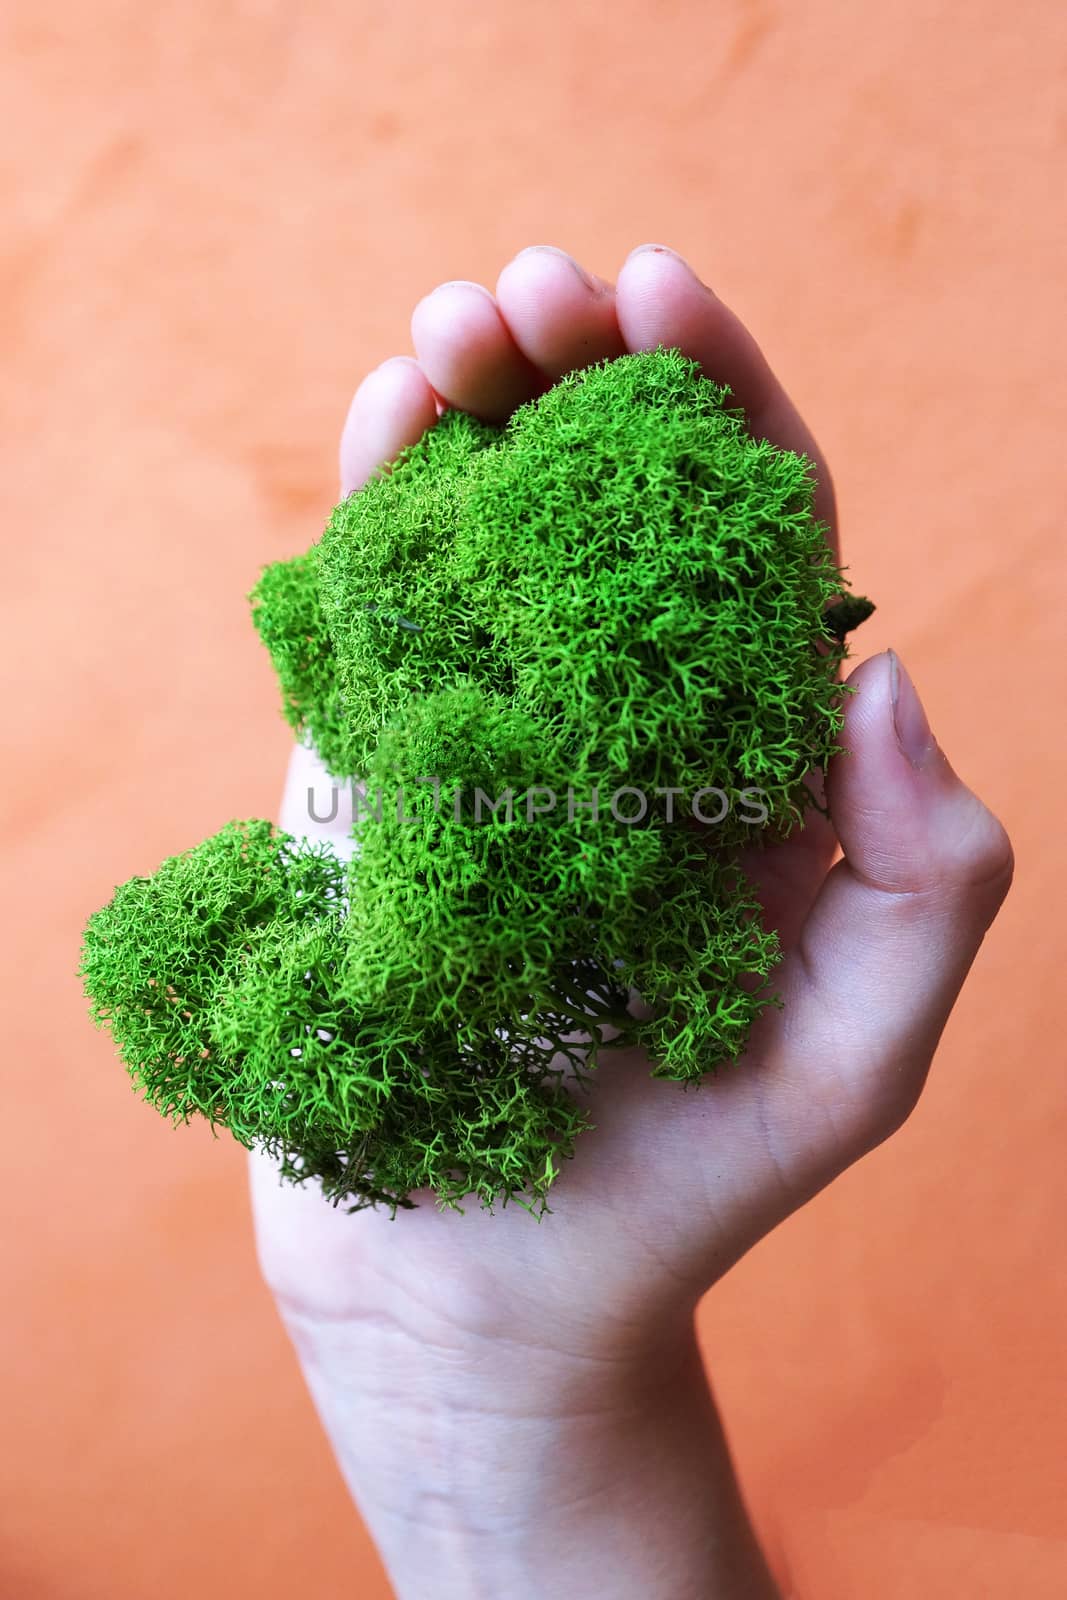 green stabilized moss in girl's hand as a symbol of purity